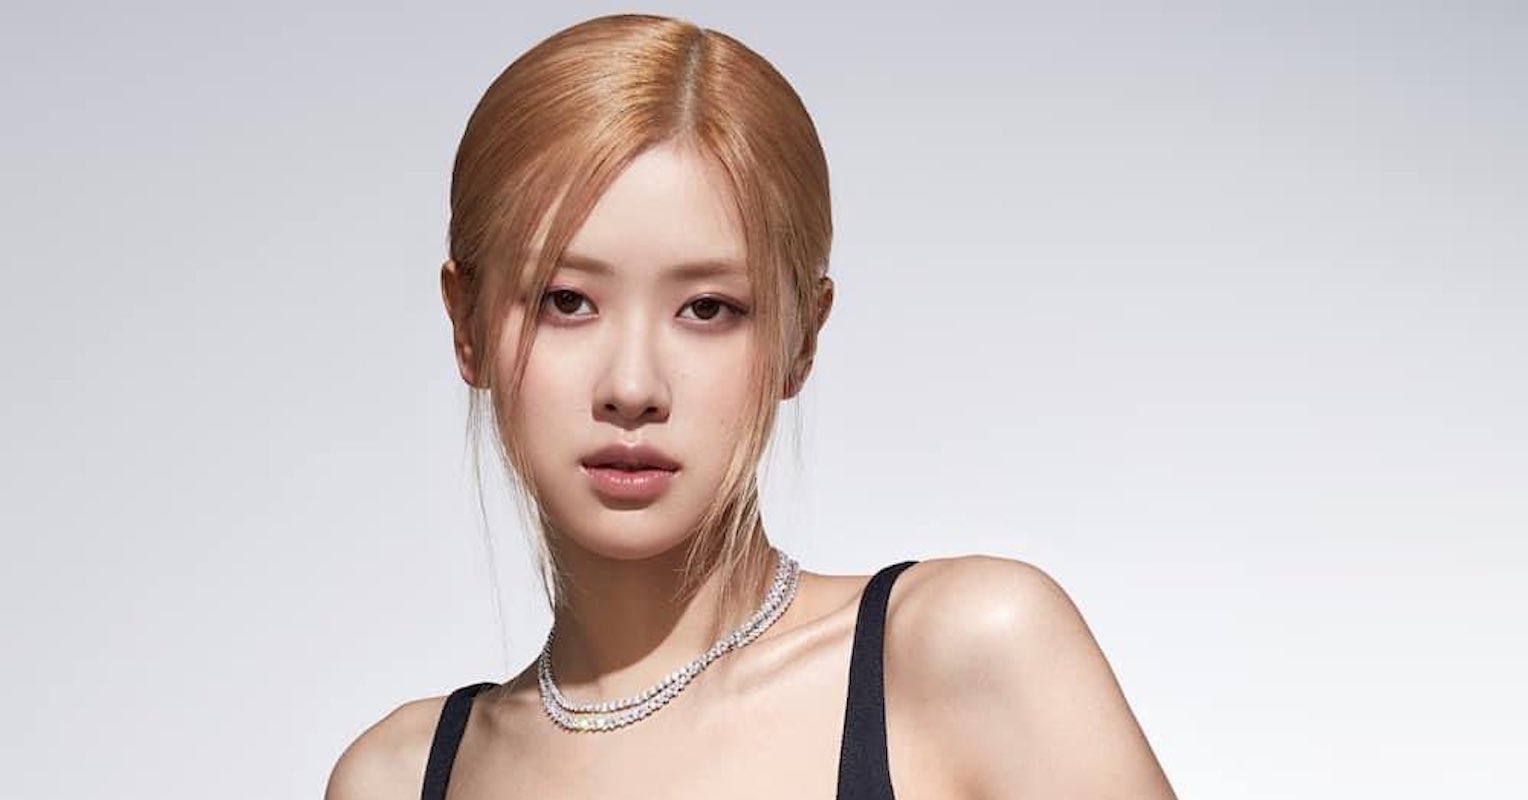 Tiffany & Co. Taps BLACKPINK'S ROSÉ as its New Global Ambassador, Fronting  the 2021 Tiffany Hardwear Campaign - Tiffany